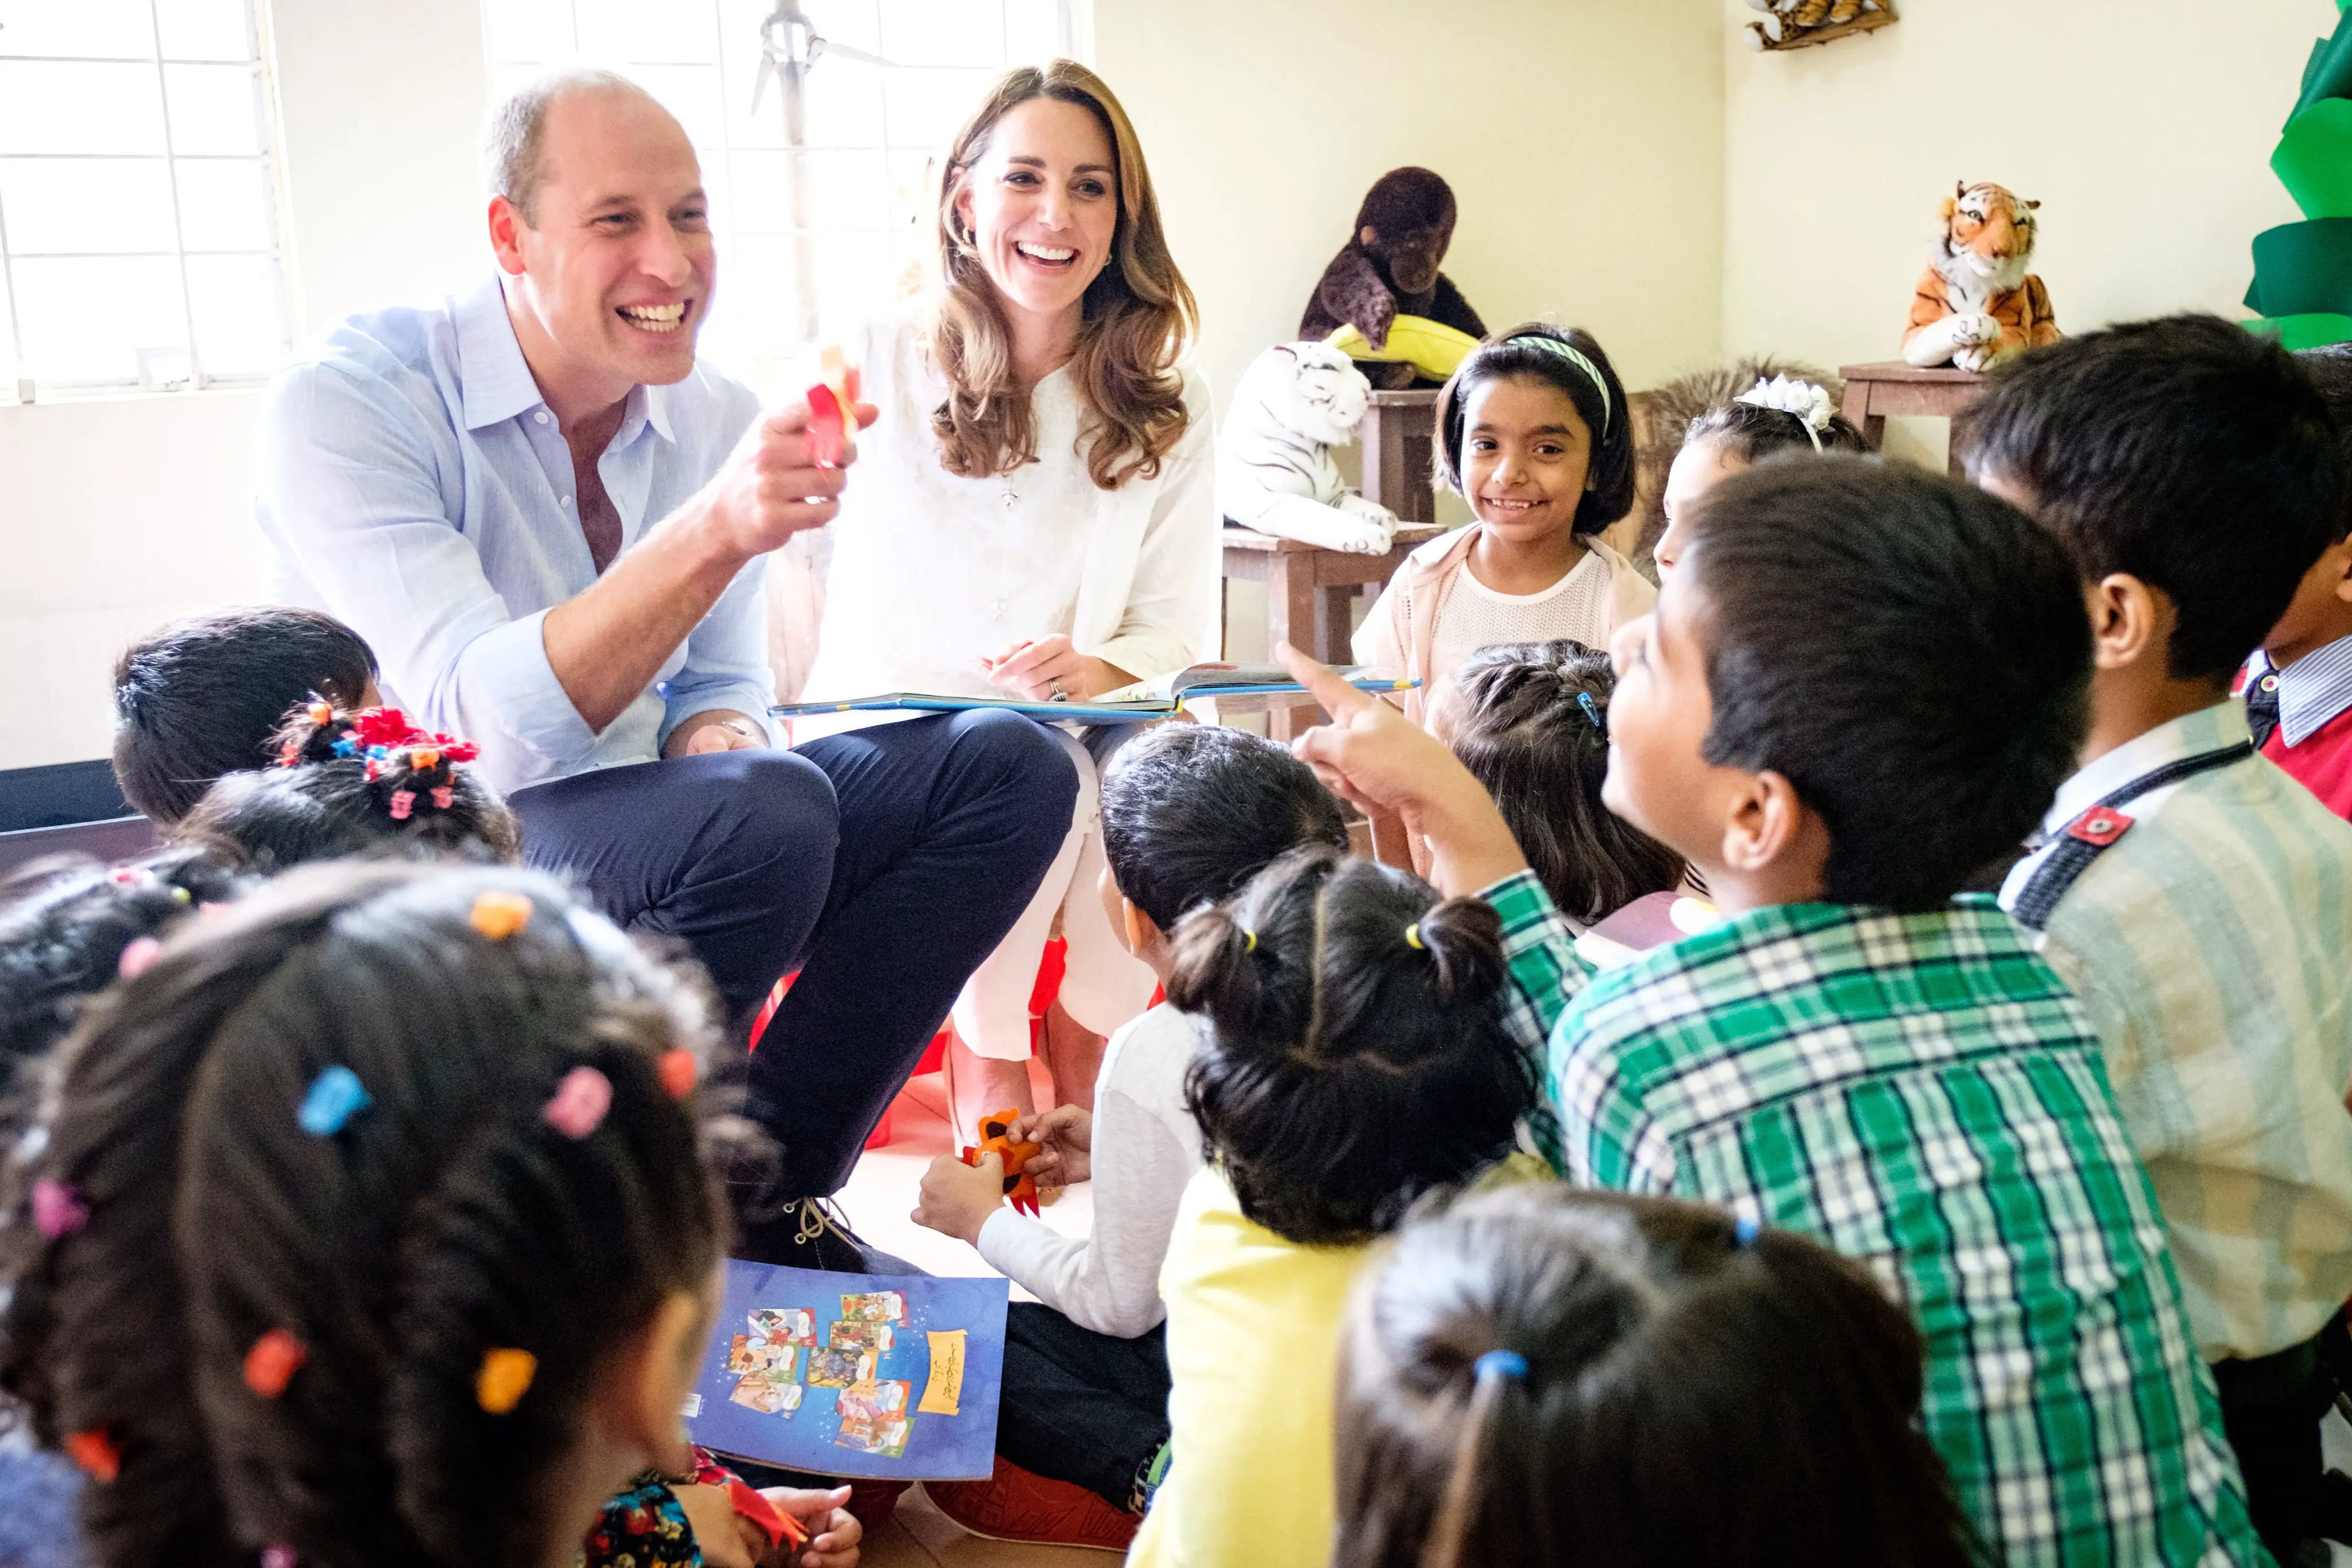 Duke and Duchess of Cambridge attended a birthday party at SOS Village in Lahore Pakistan